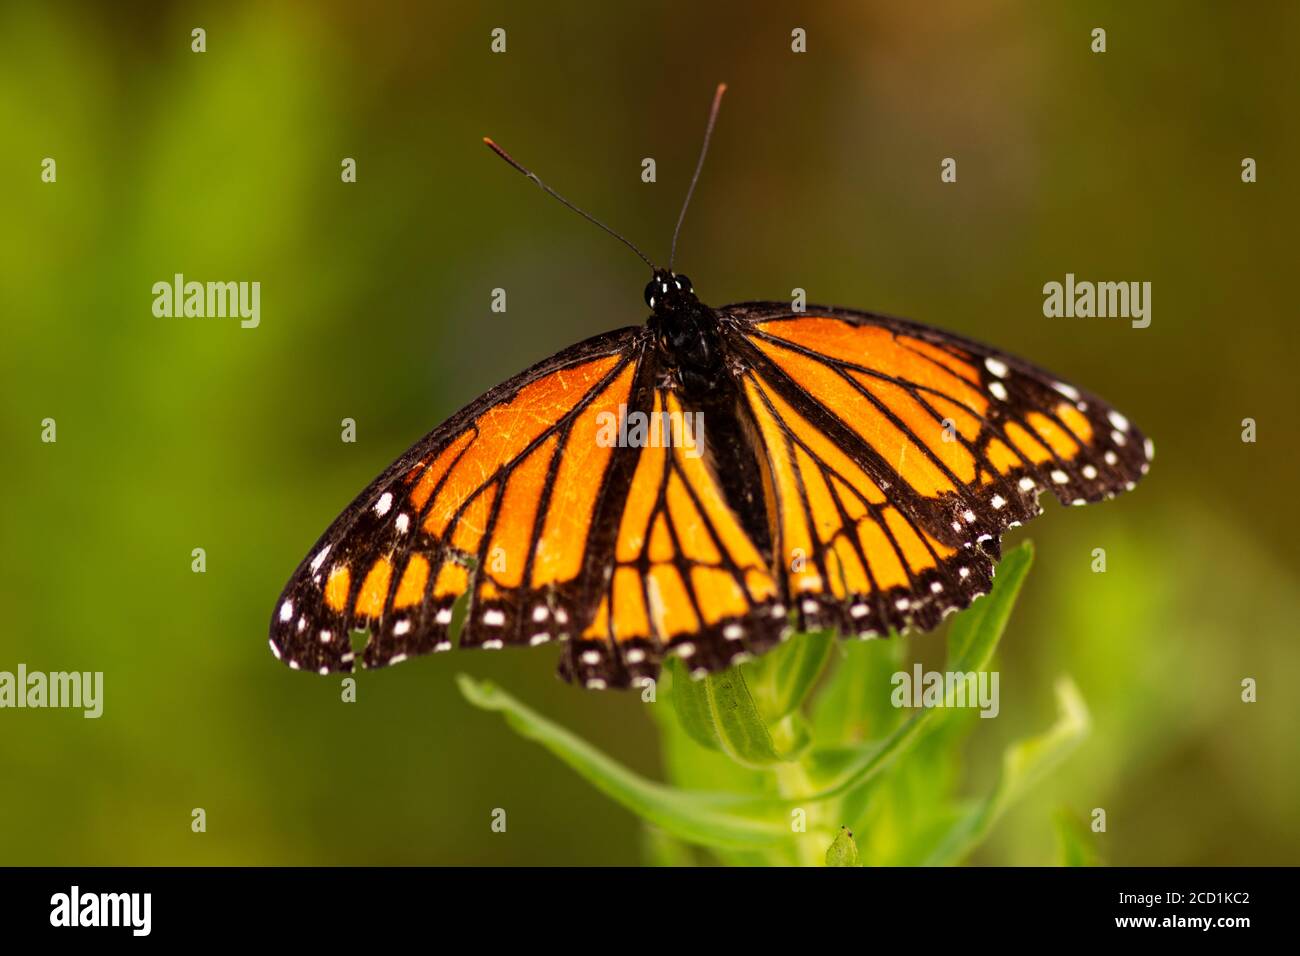 A Monarch Butterfly (Danaus plexippus) perched on a wild plant. Stock Photo